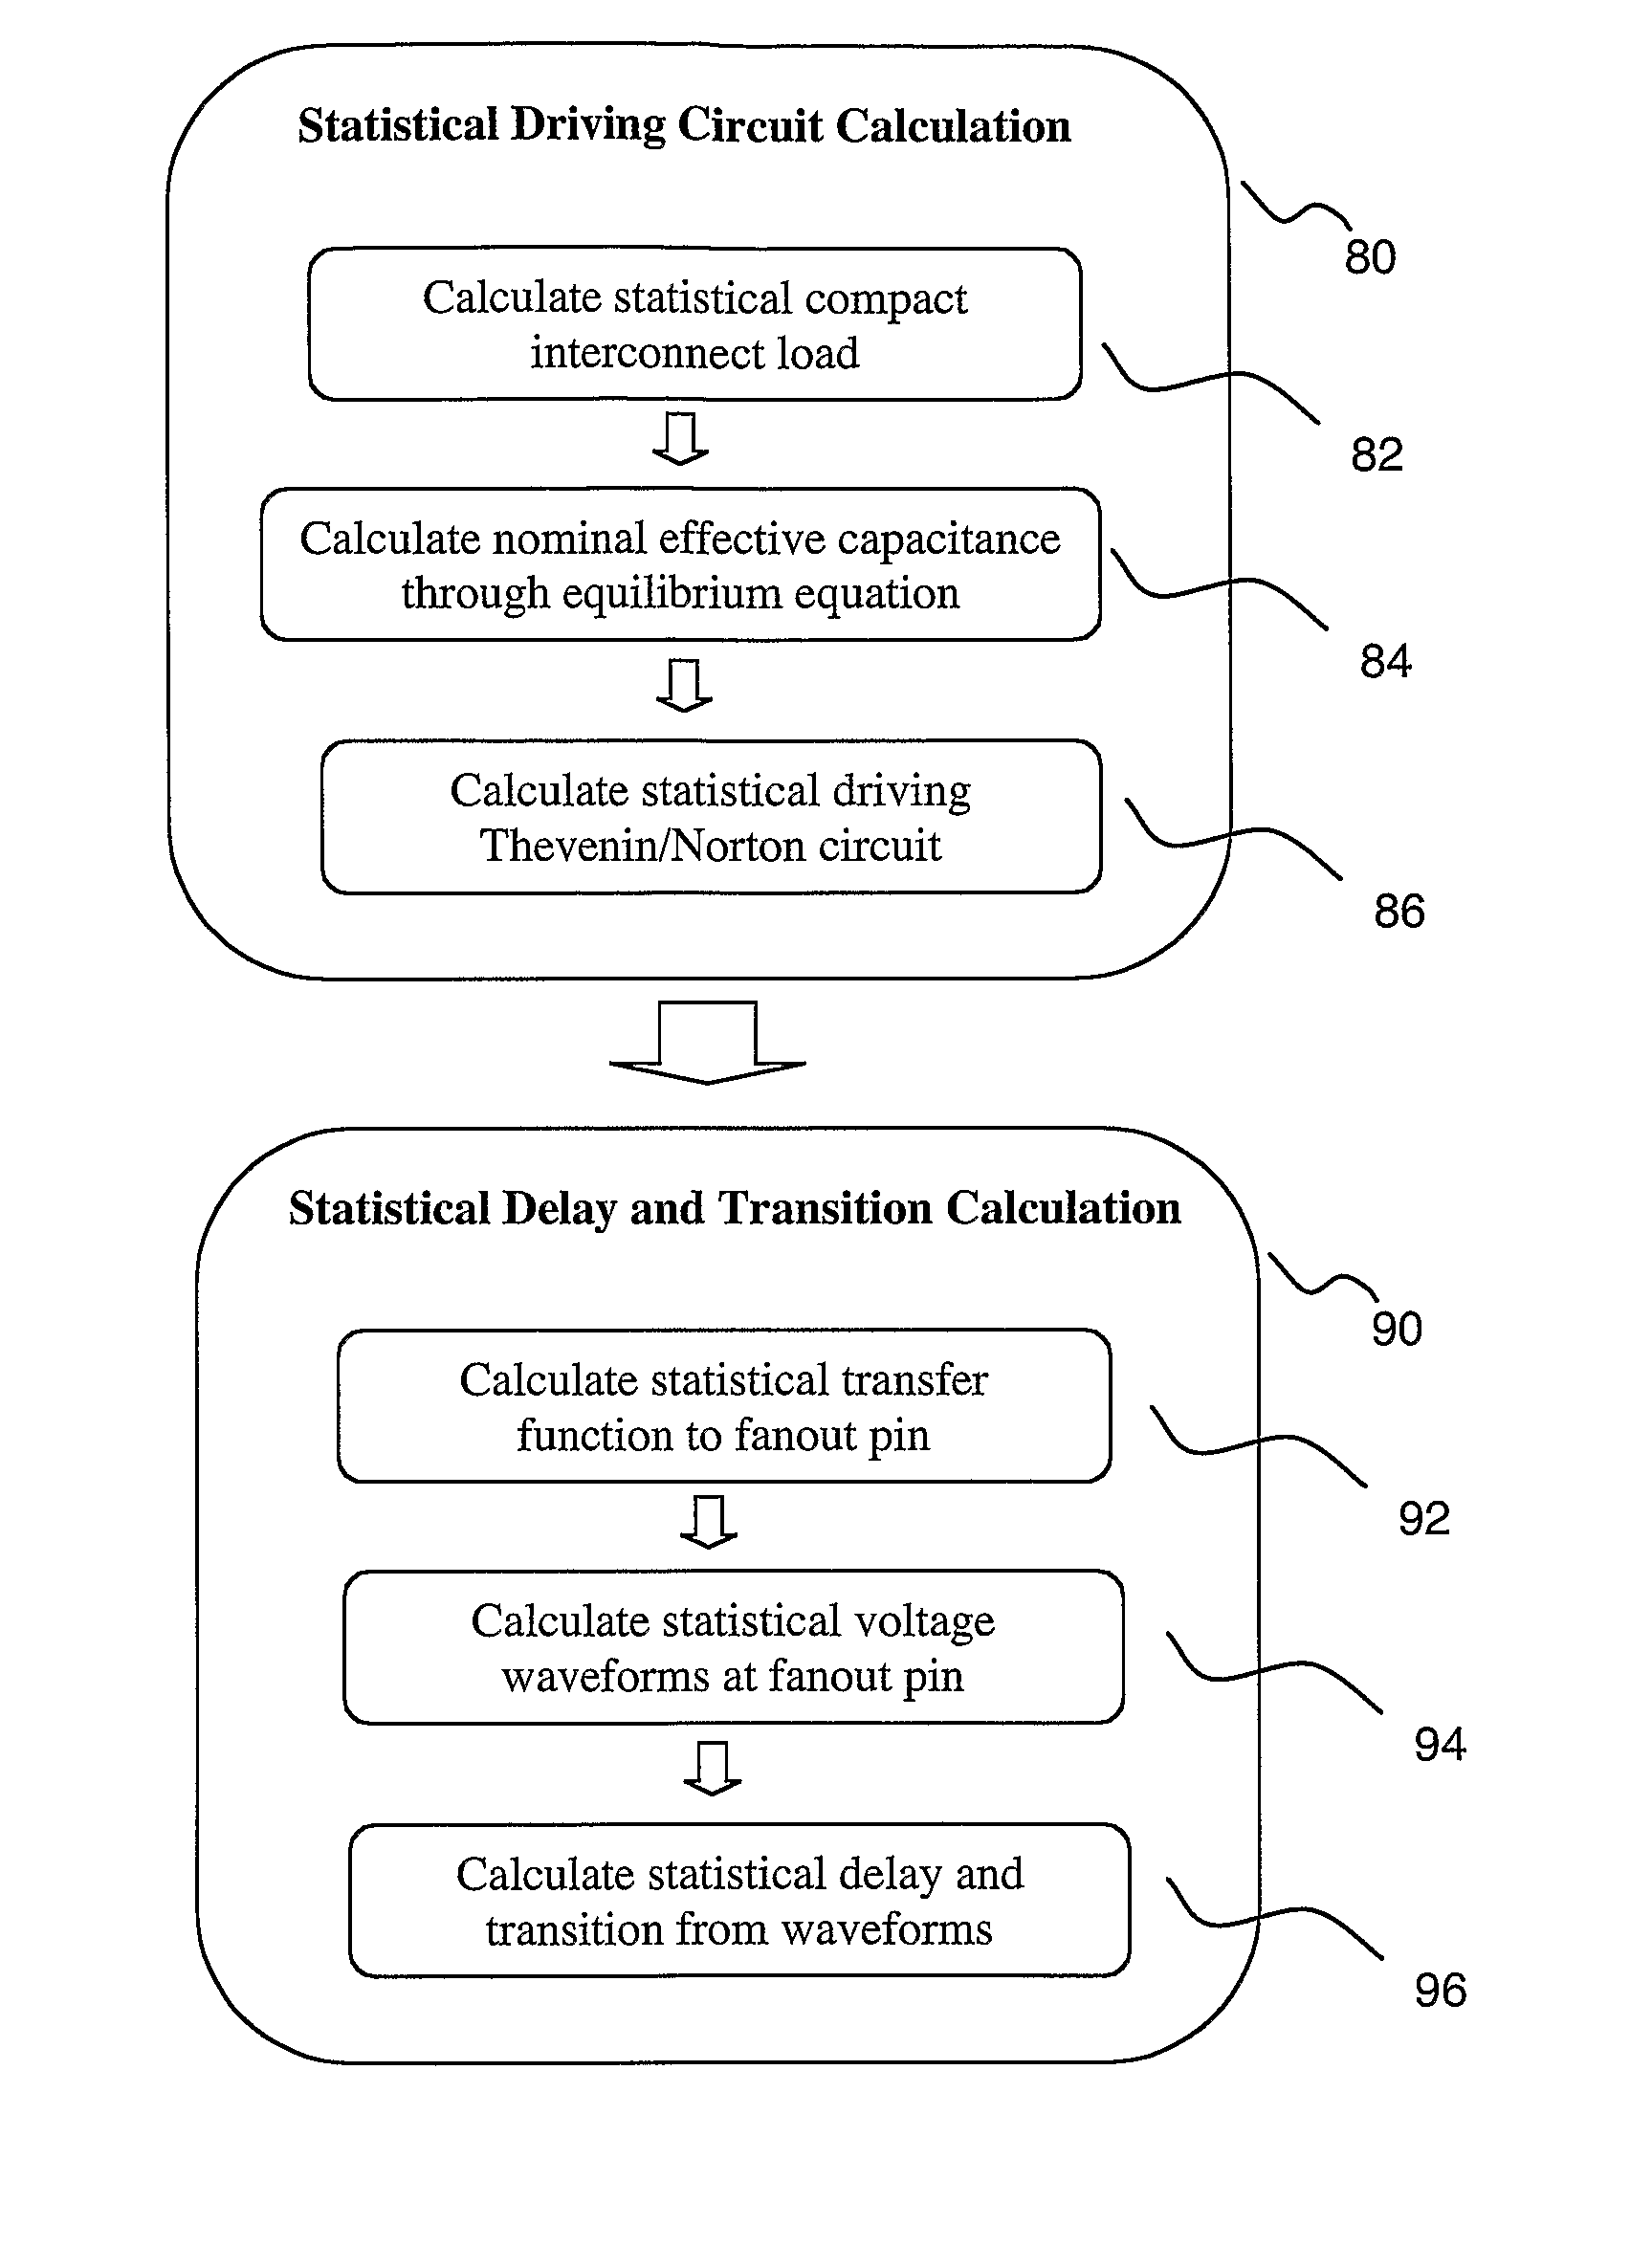 Statistical delay and noise calculation considering cell and interconnect variations